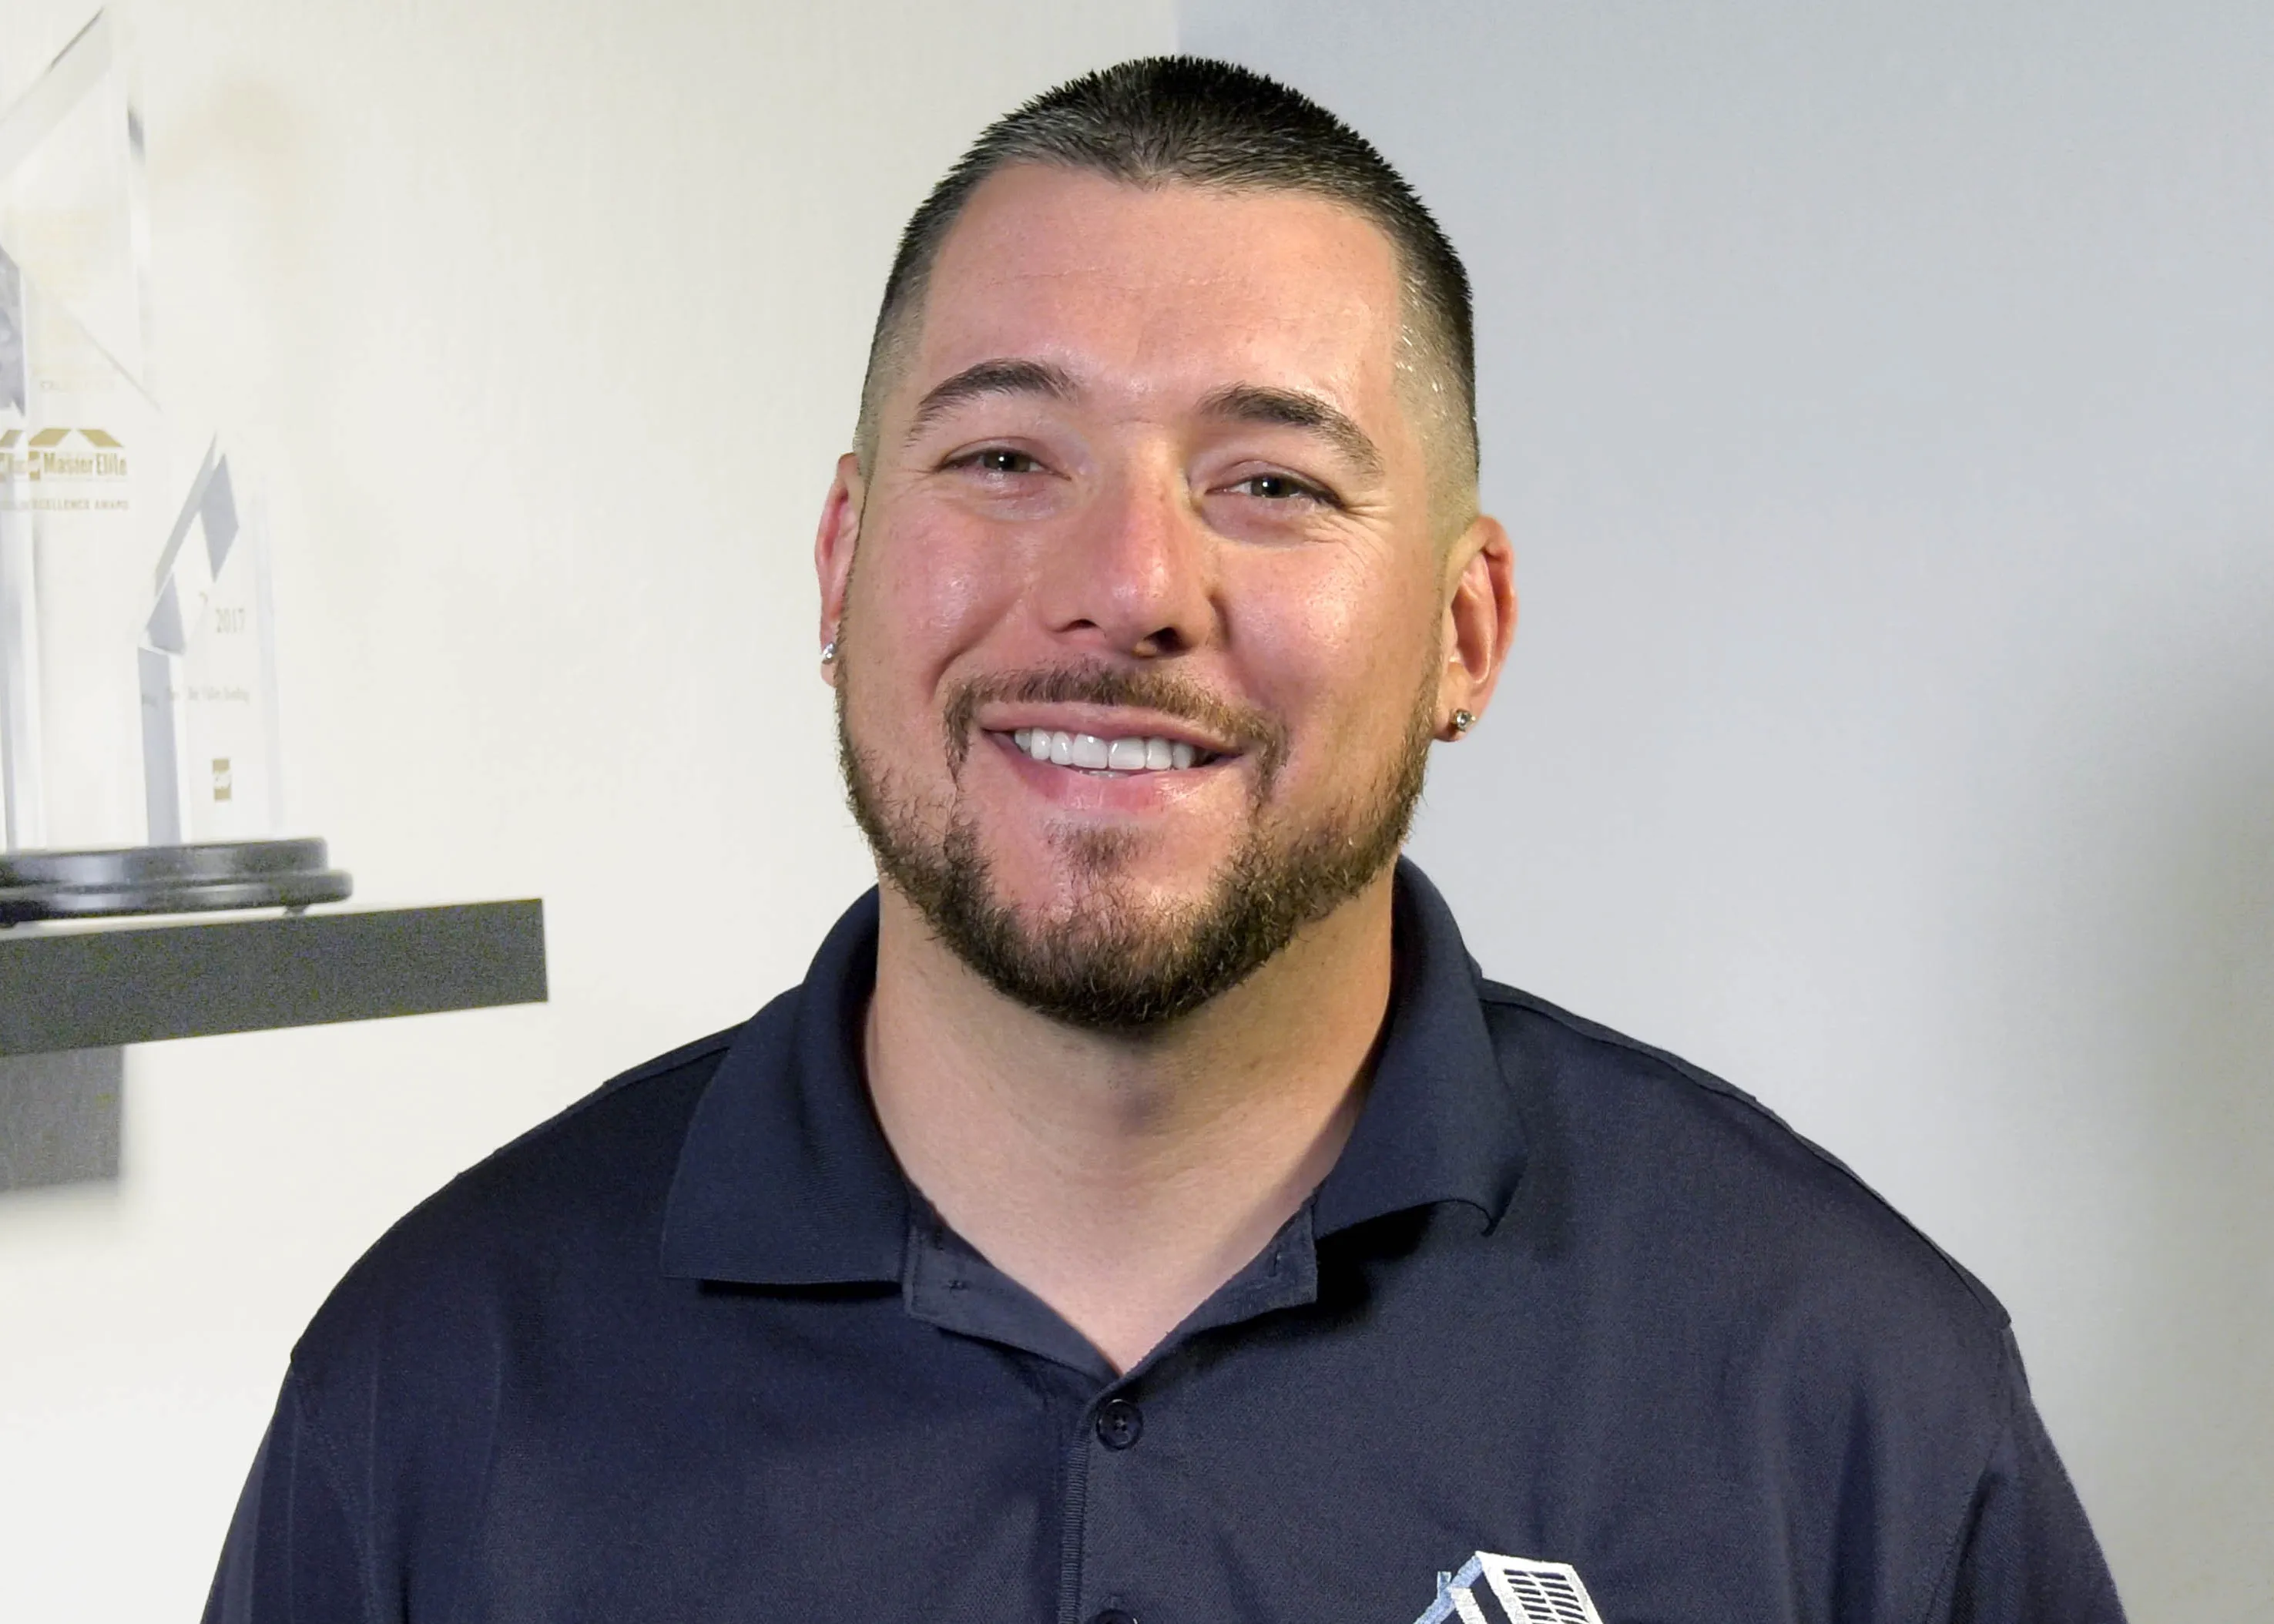 Ryan Diaz is a second-generation roofing professional and vice president of Bay Valley Roofing, a Diamond Certified company since 2012. He can be reached at (925) 726-3792.